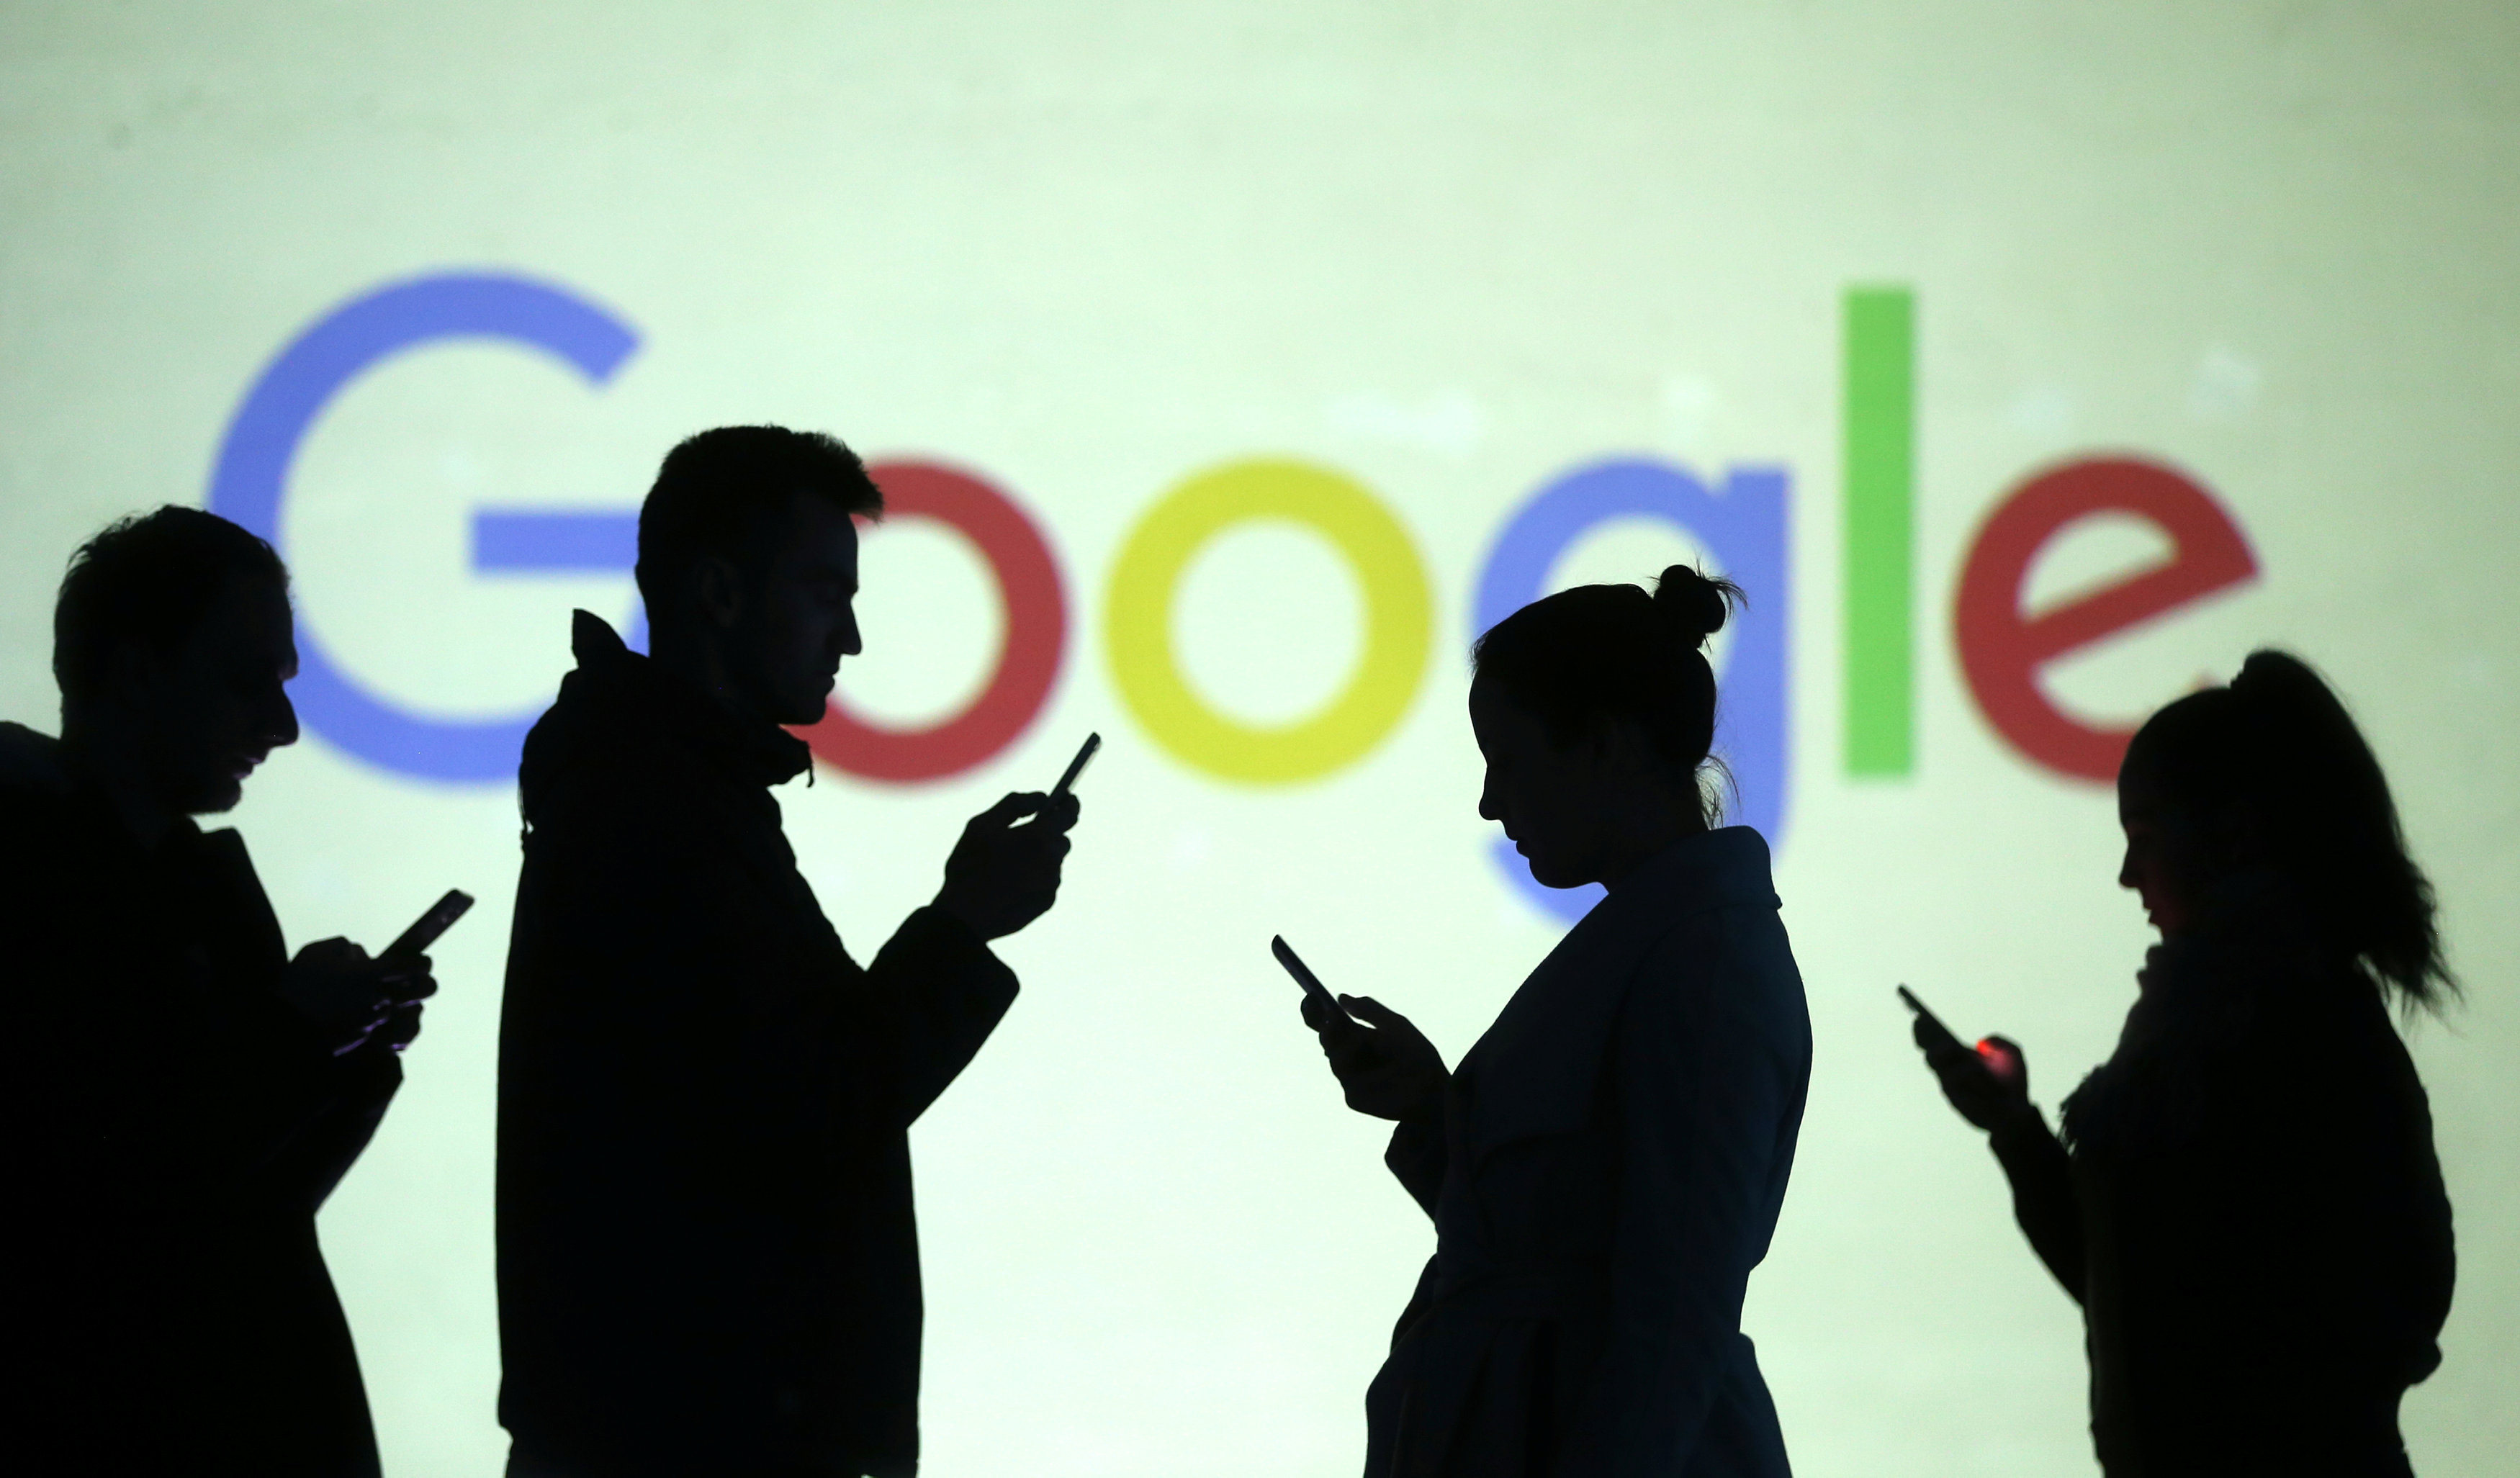 Google employees organize to fight cyberbullying at work